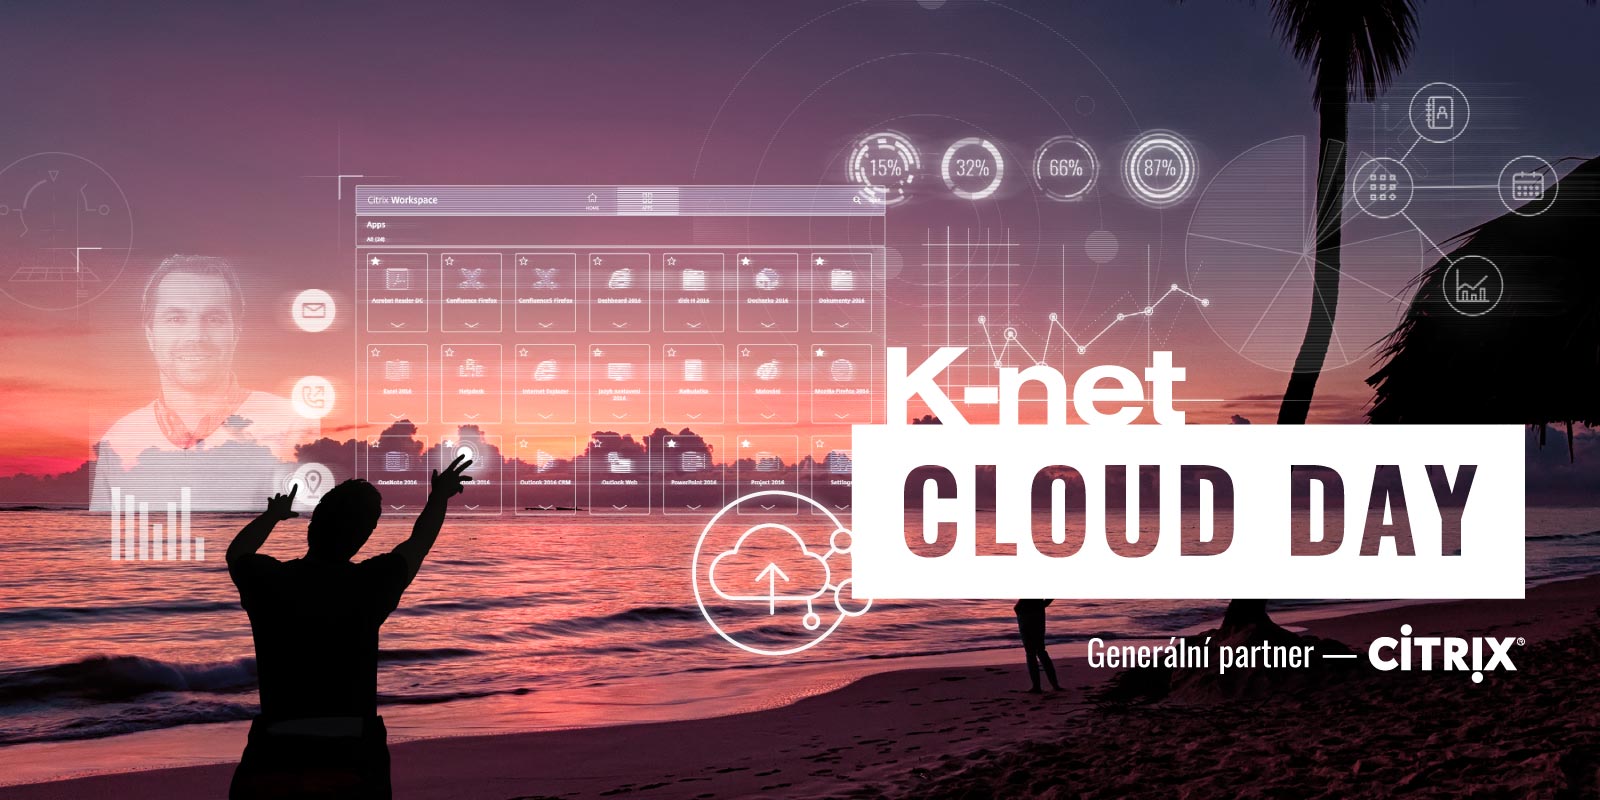 Invitation at the event of K-net "Cloud Day 2019"